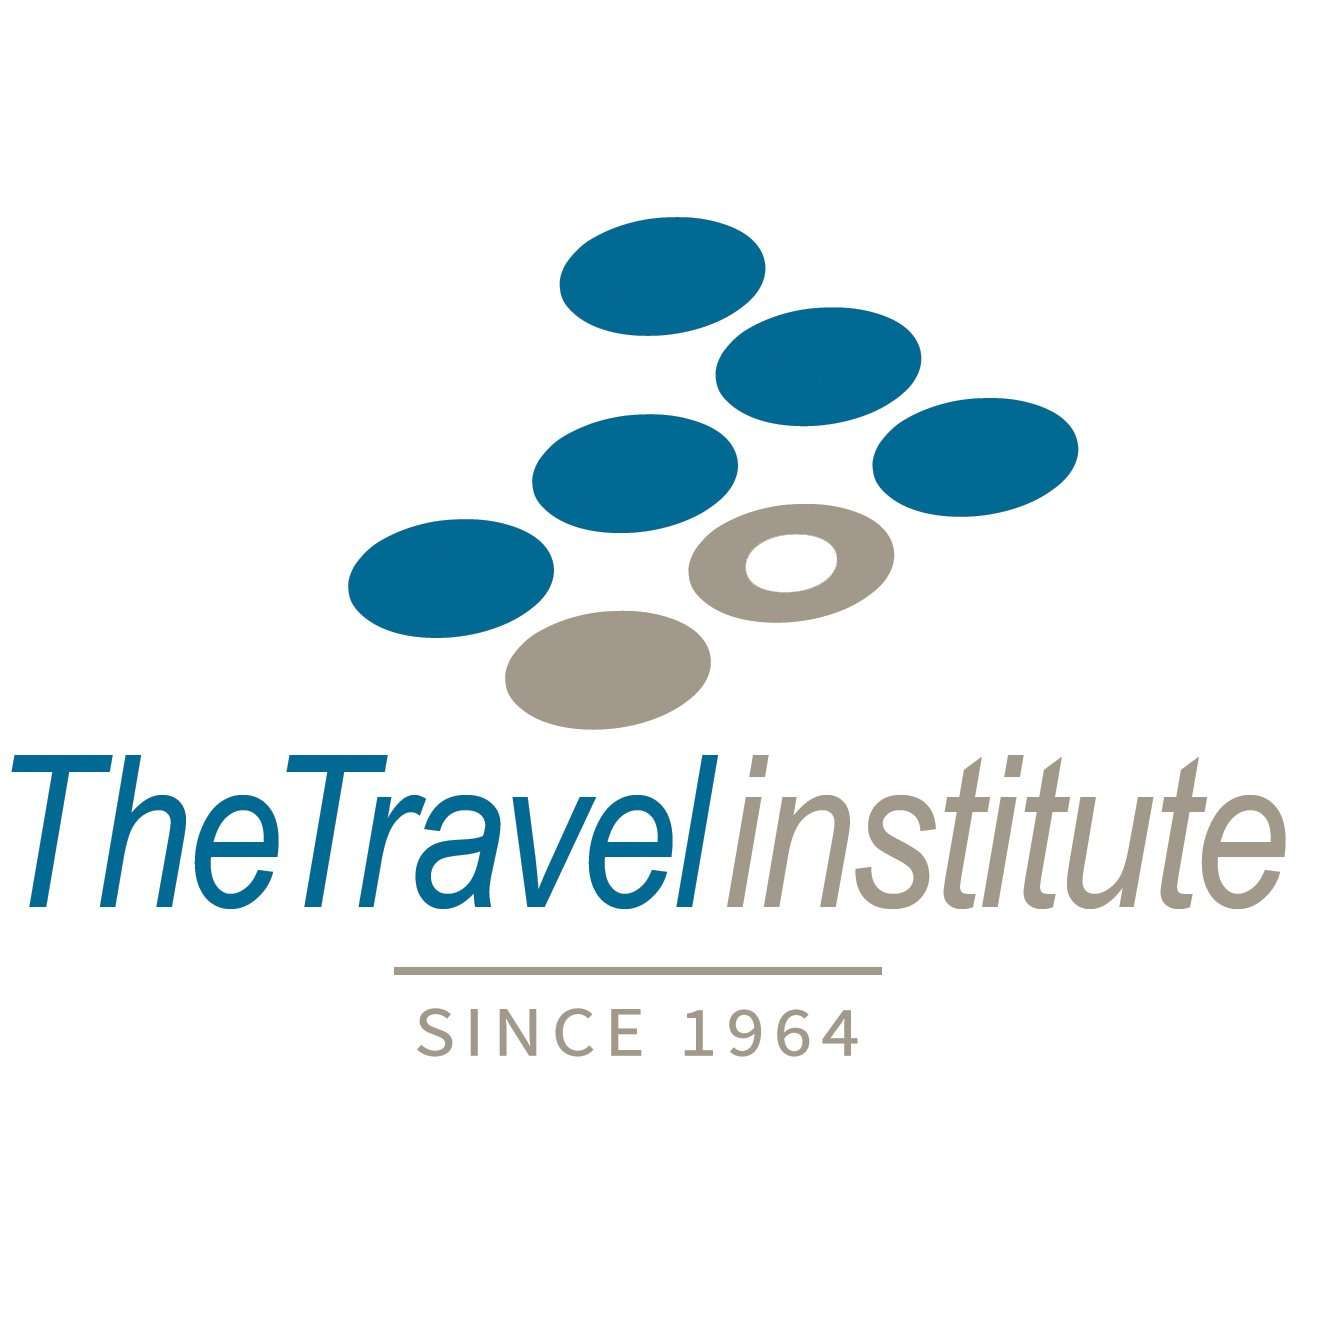 A logo for the travel institute since 1964